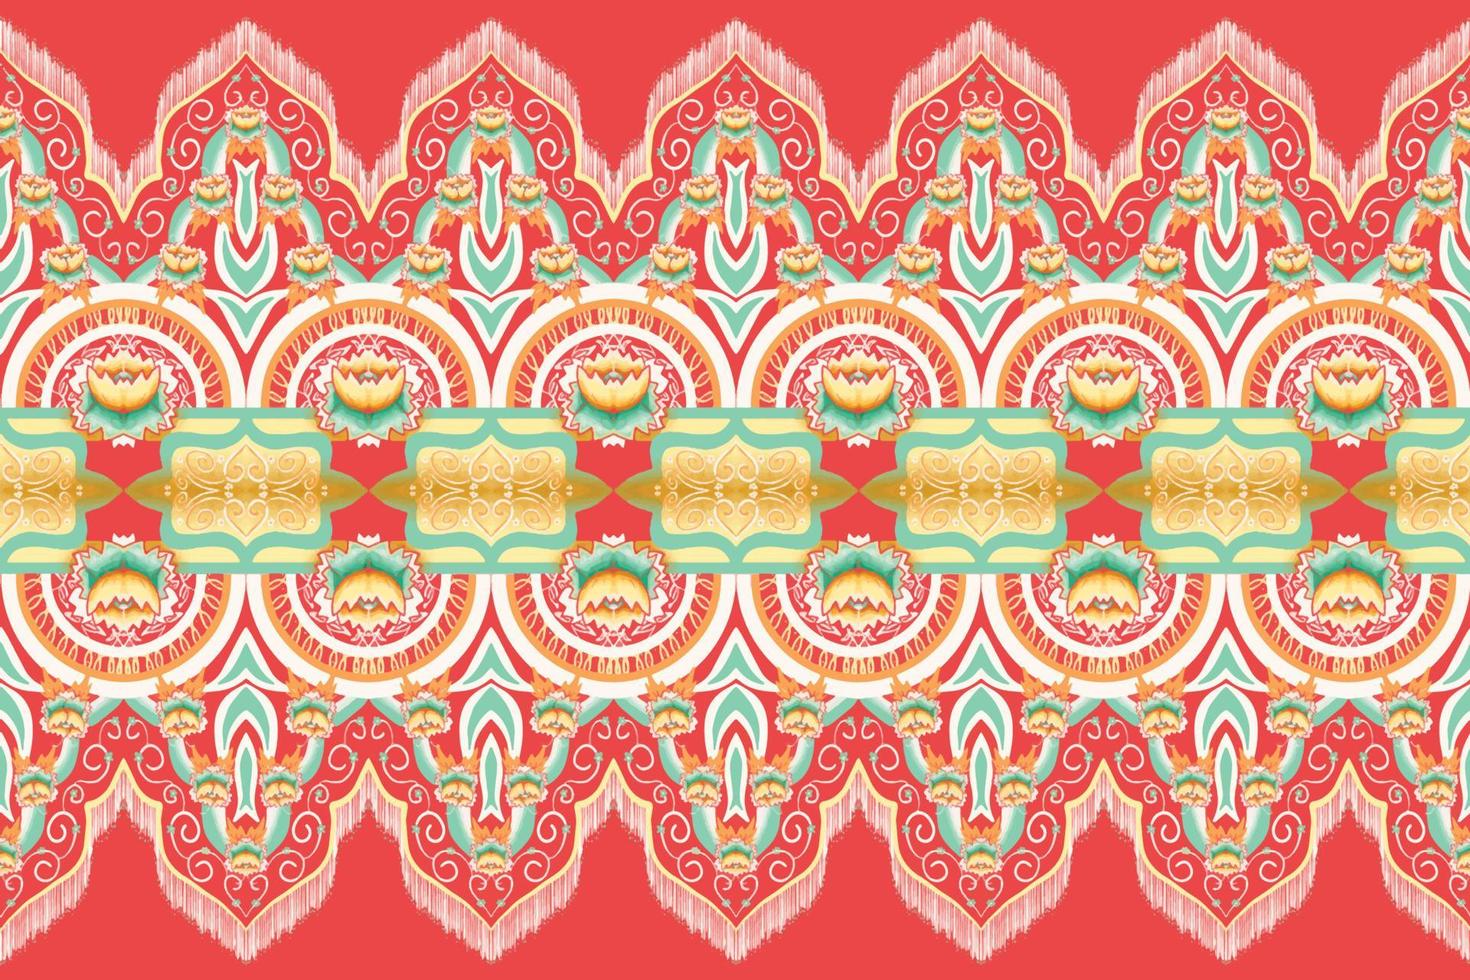 Yellow, Green, Orange Flower on Red. Geometric ethnic oriental pattern traditional Design for background,carpet,wallpaper,clothing,wrapping,Batik,fabric, vector illustration embroidery style